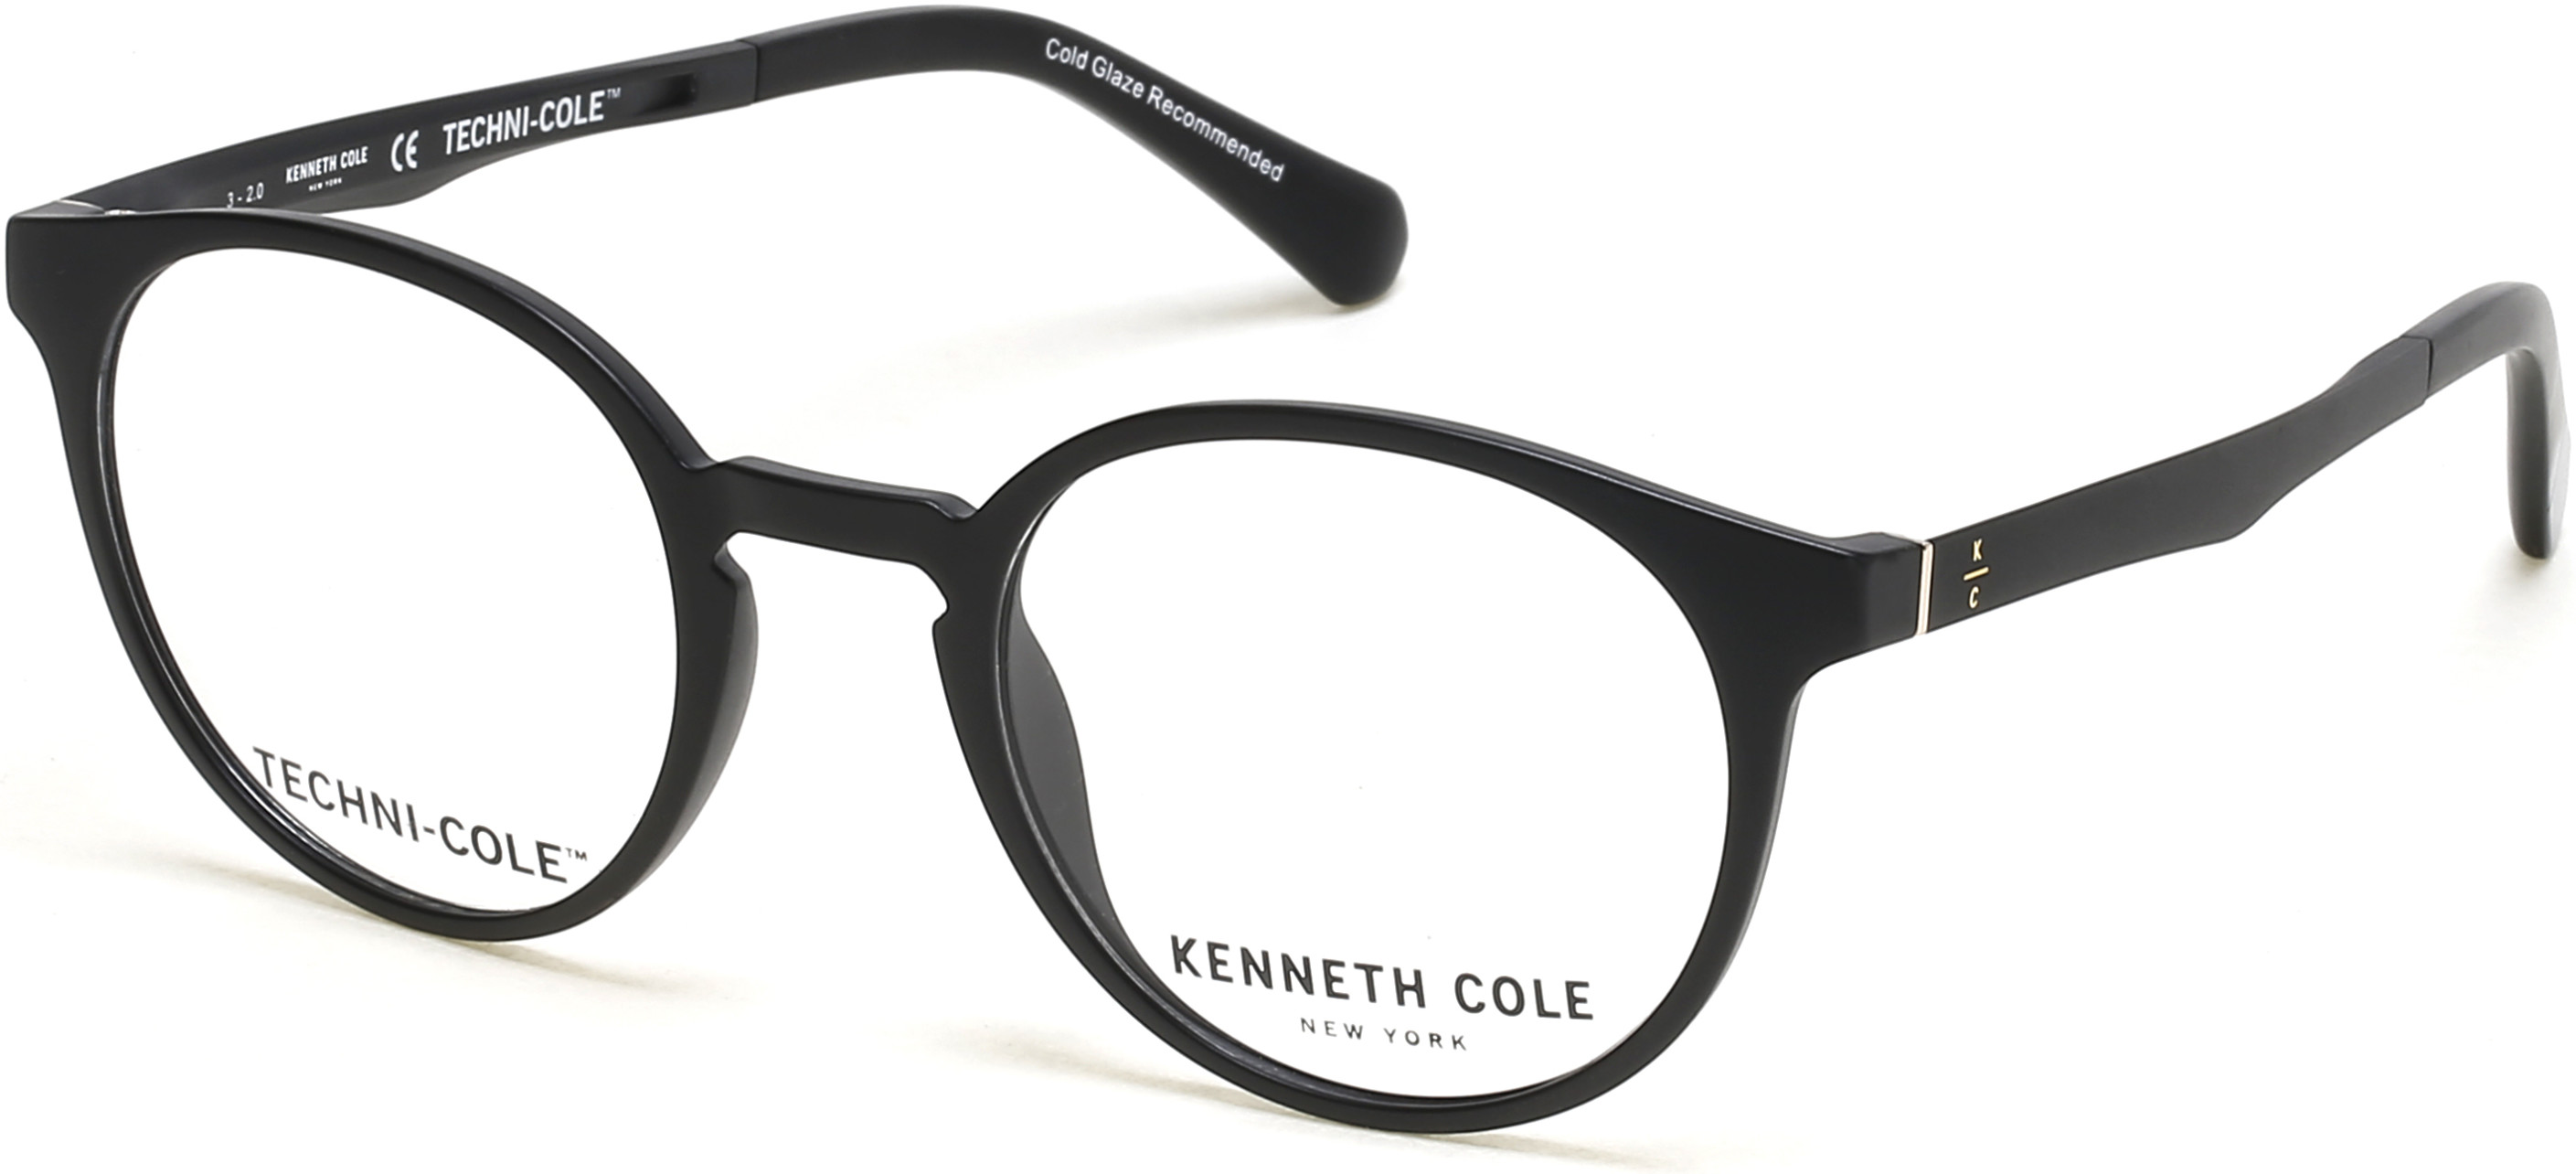 KENNETH COLE NY 0319